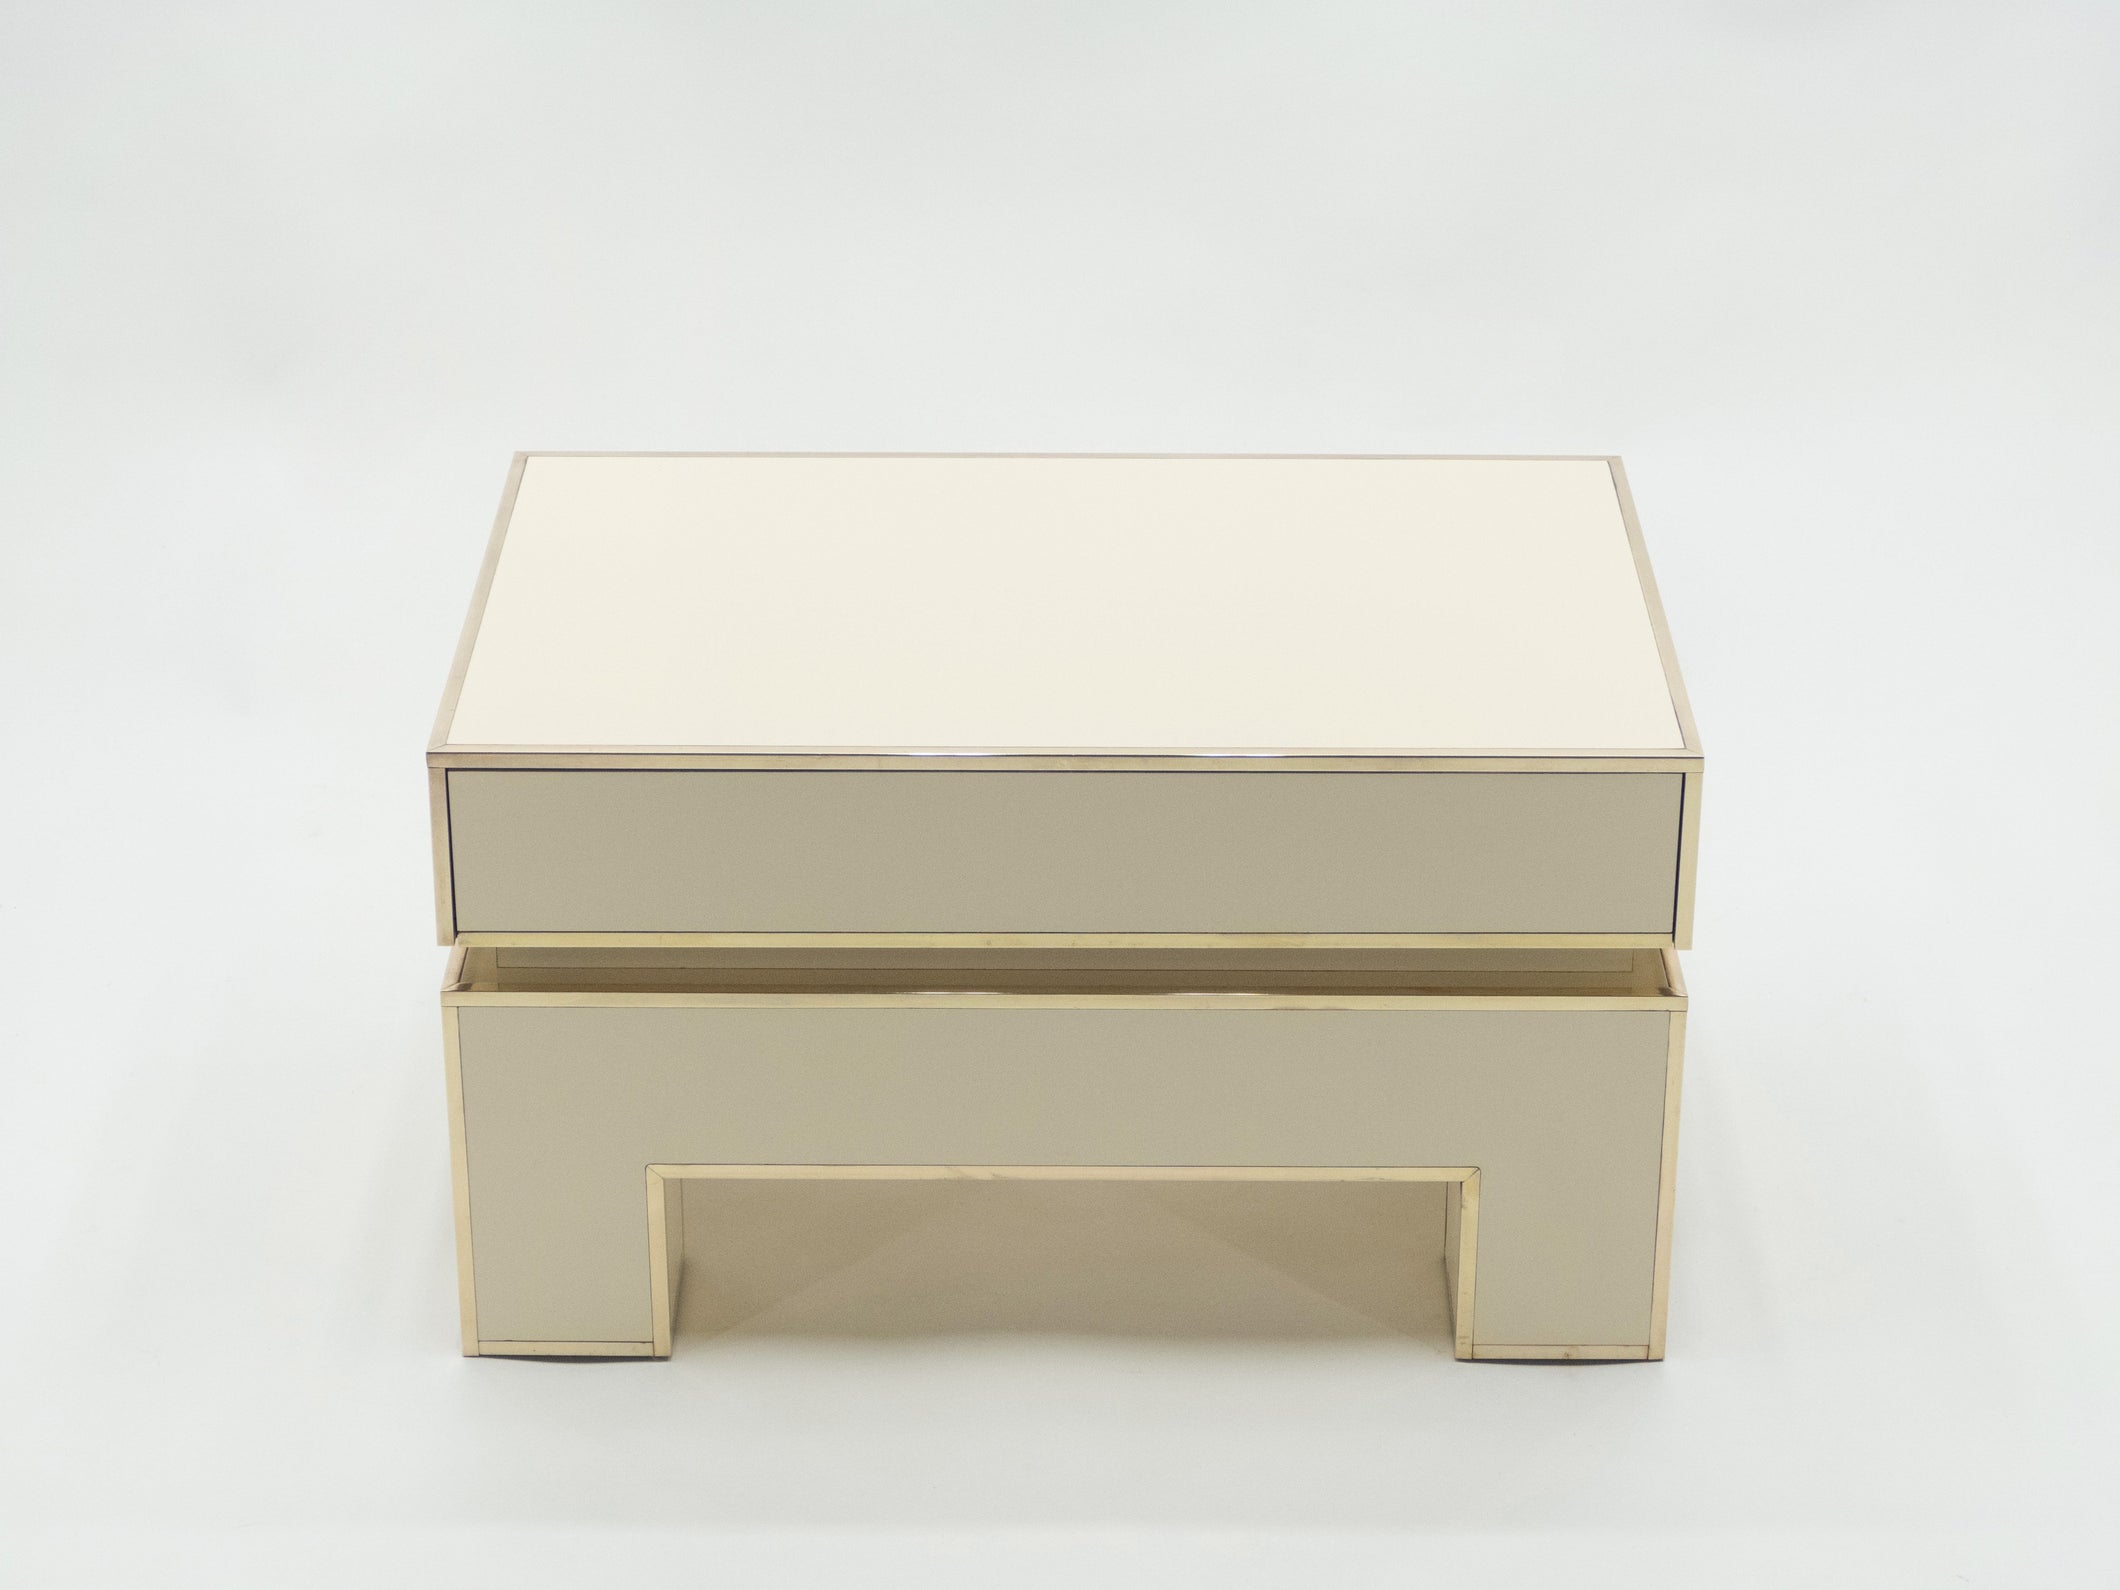 Pair of white lacquer brass end tables by Alain Delon for Maison Jansen 1975